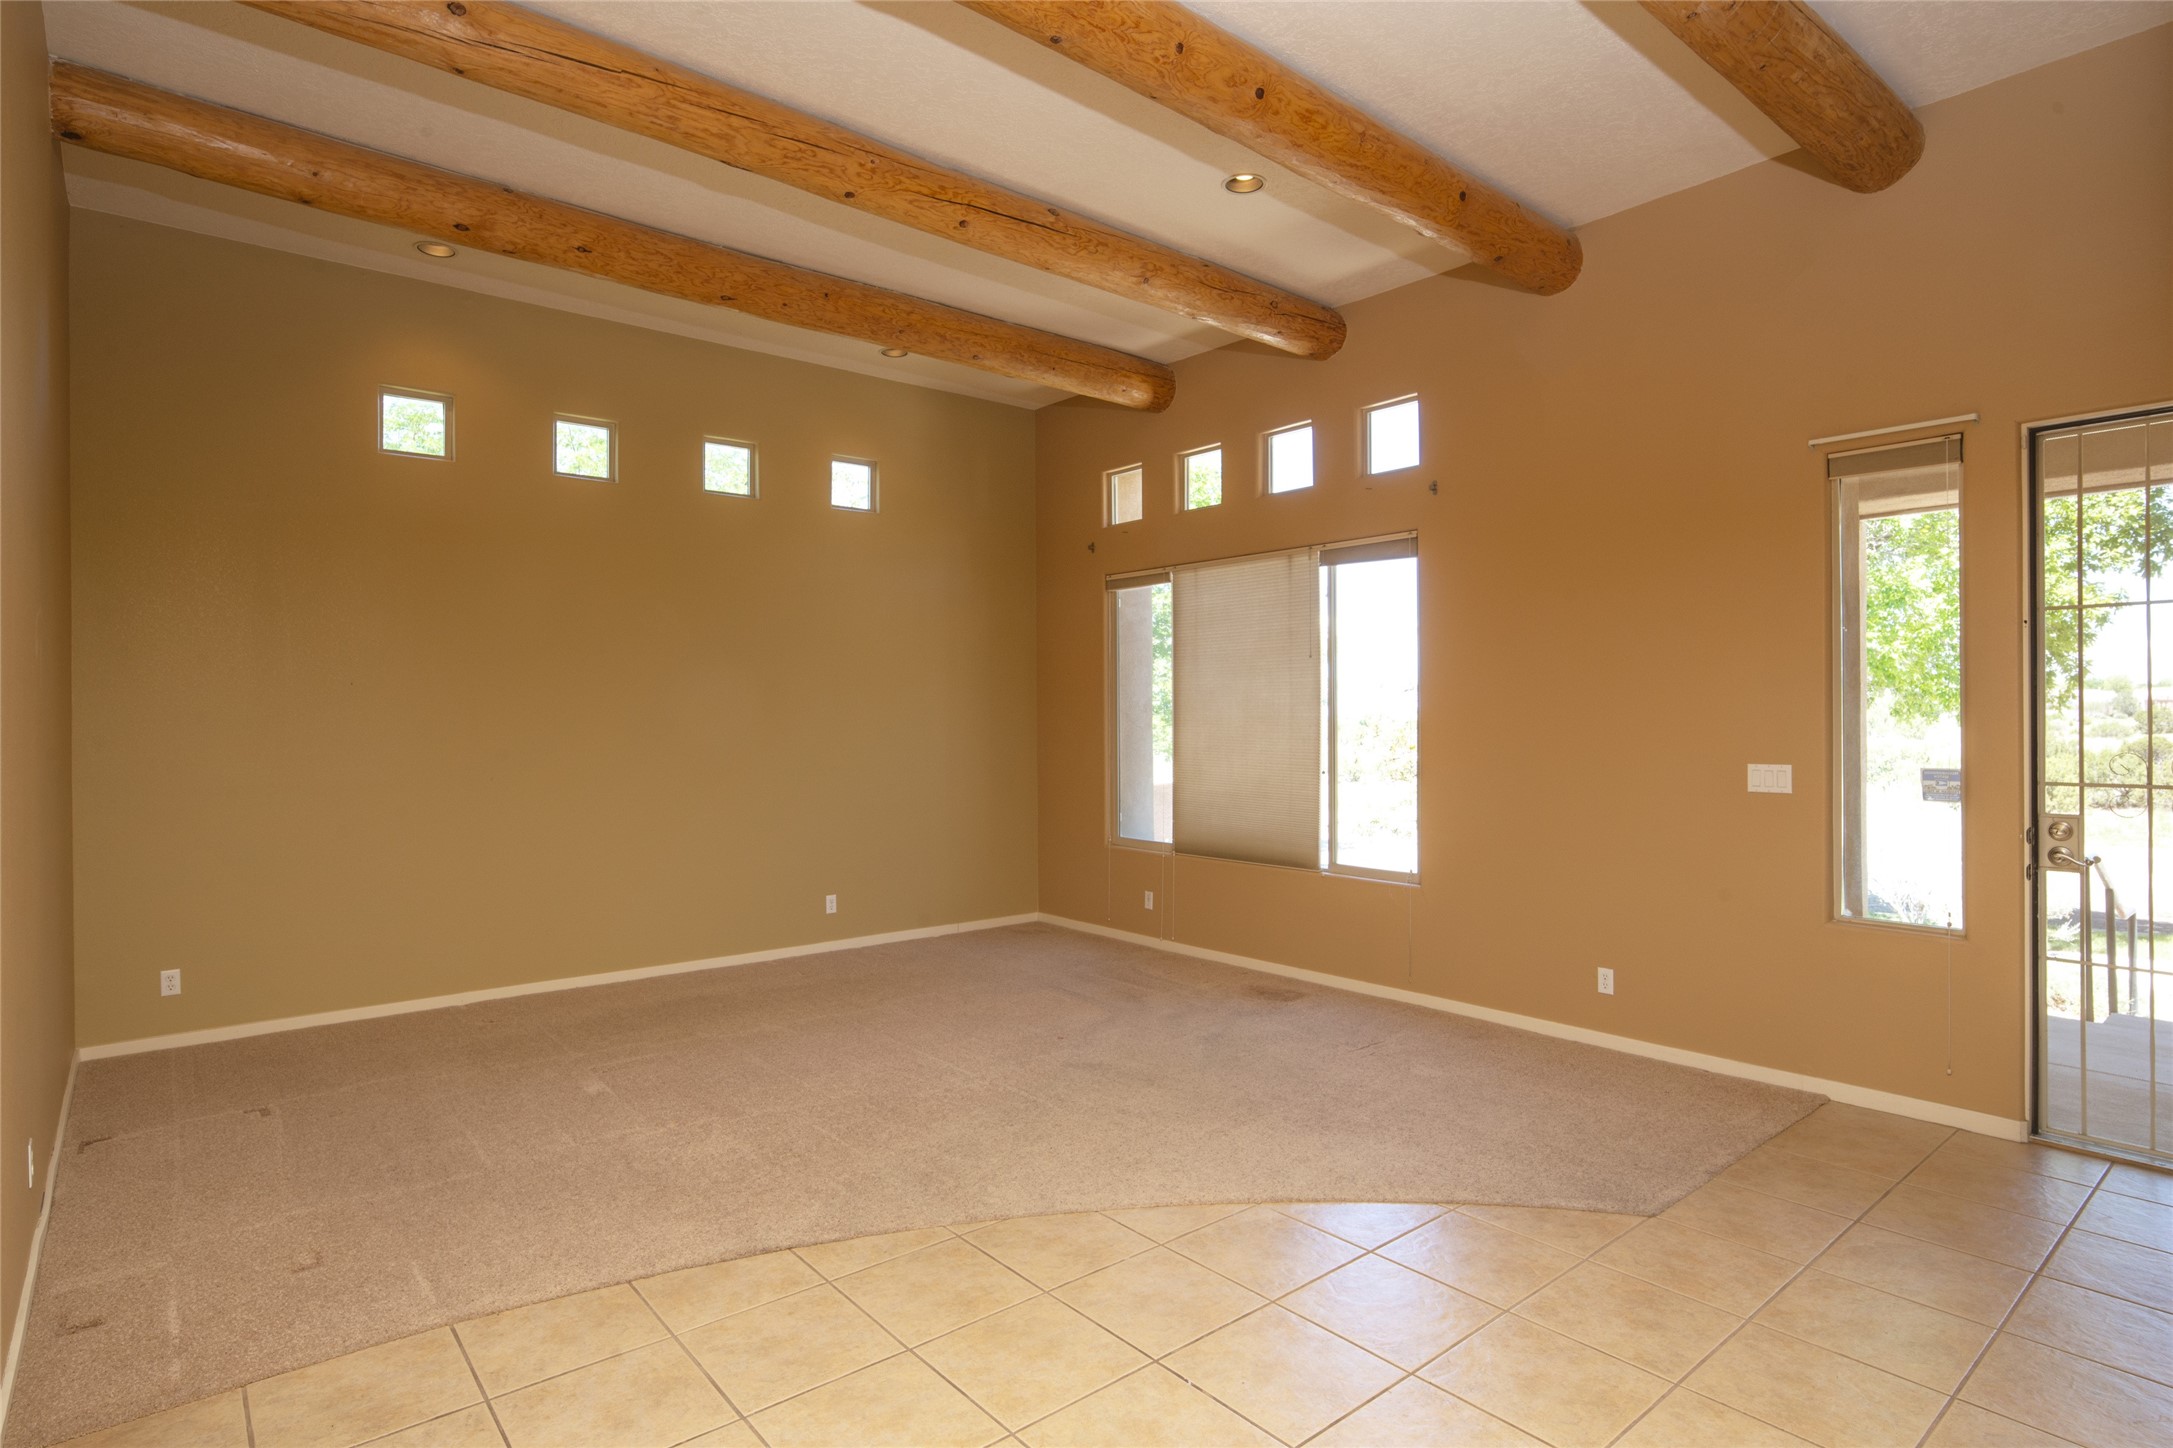 6555 S Richards, Santa Fe, New Mexico 87508, 3 Bedrooms Bedrooms, ,2 BathroomsBathrooms,Residential,For Sale,6555 S Richards,202232005